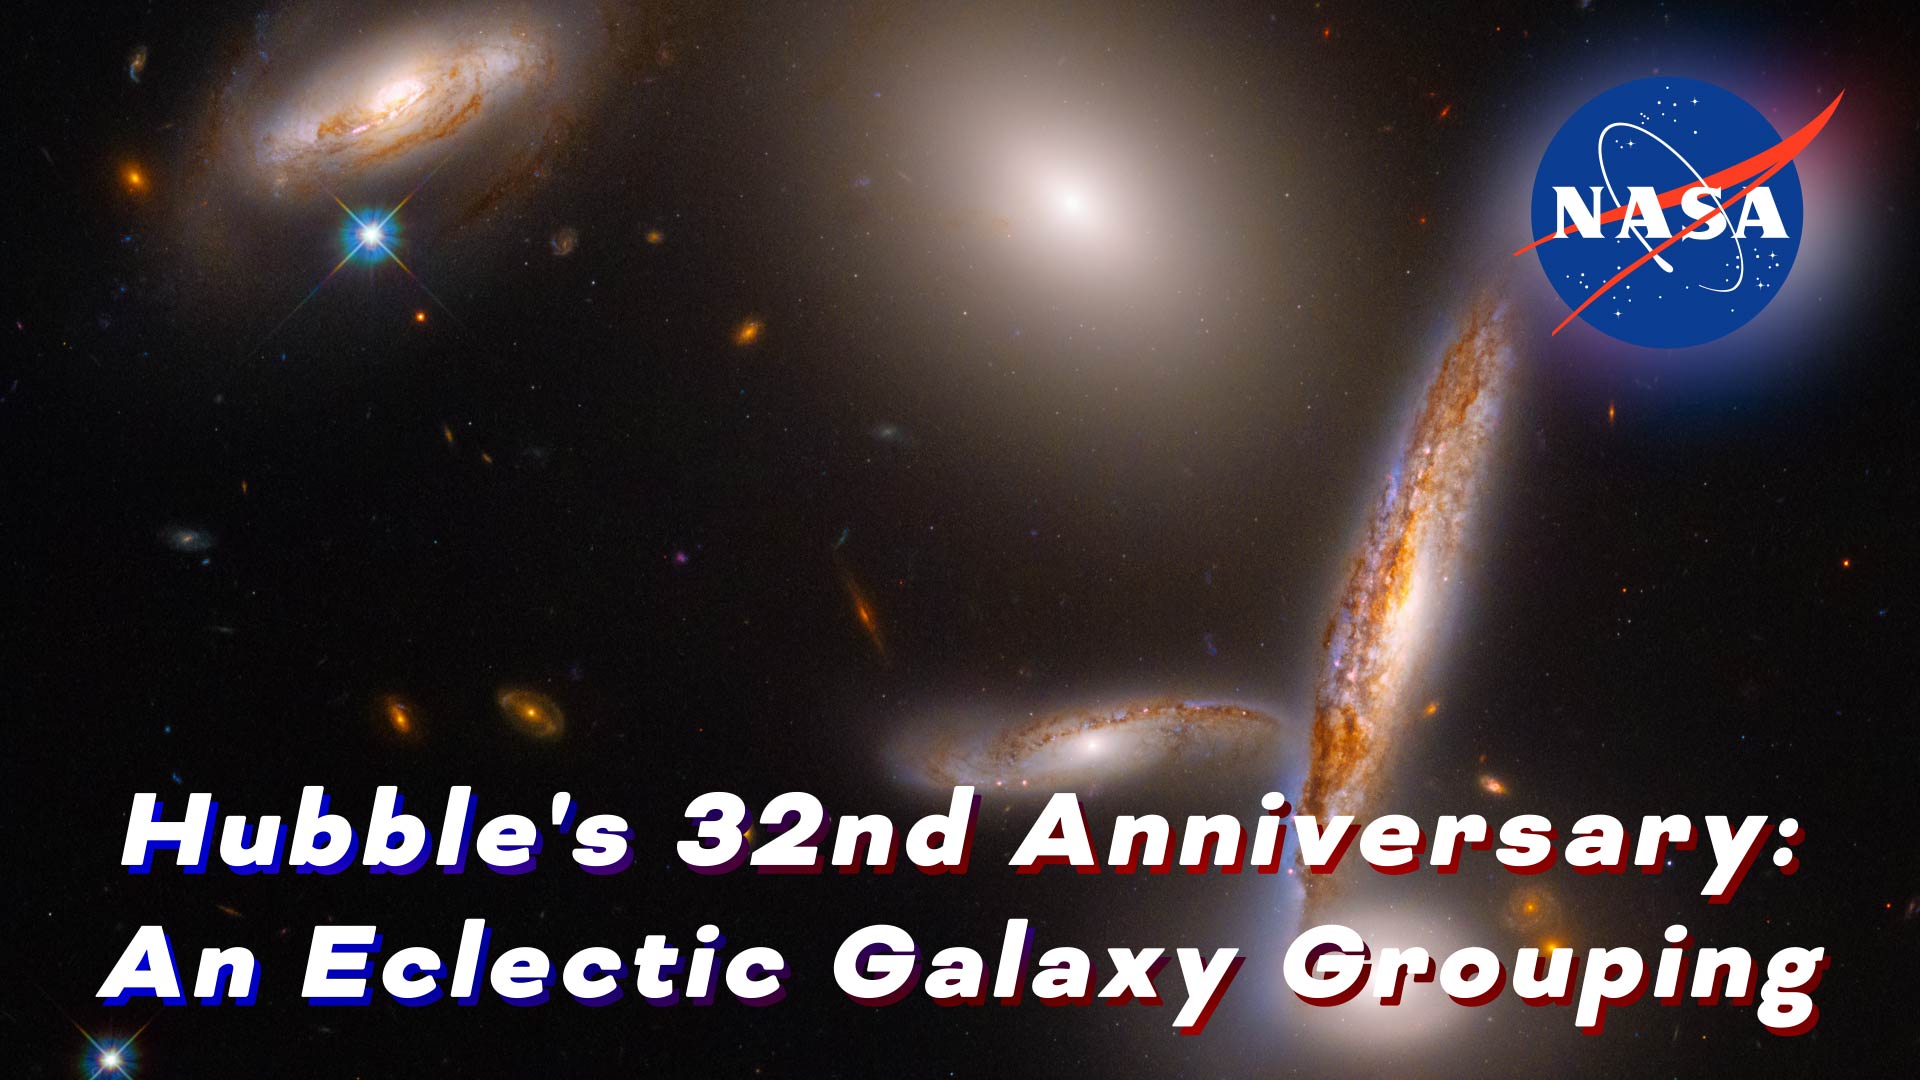 Preview Image for Hubble's 32nd Anniversary: An Eclectic Galaxy Grouping